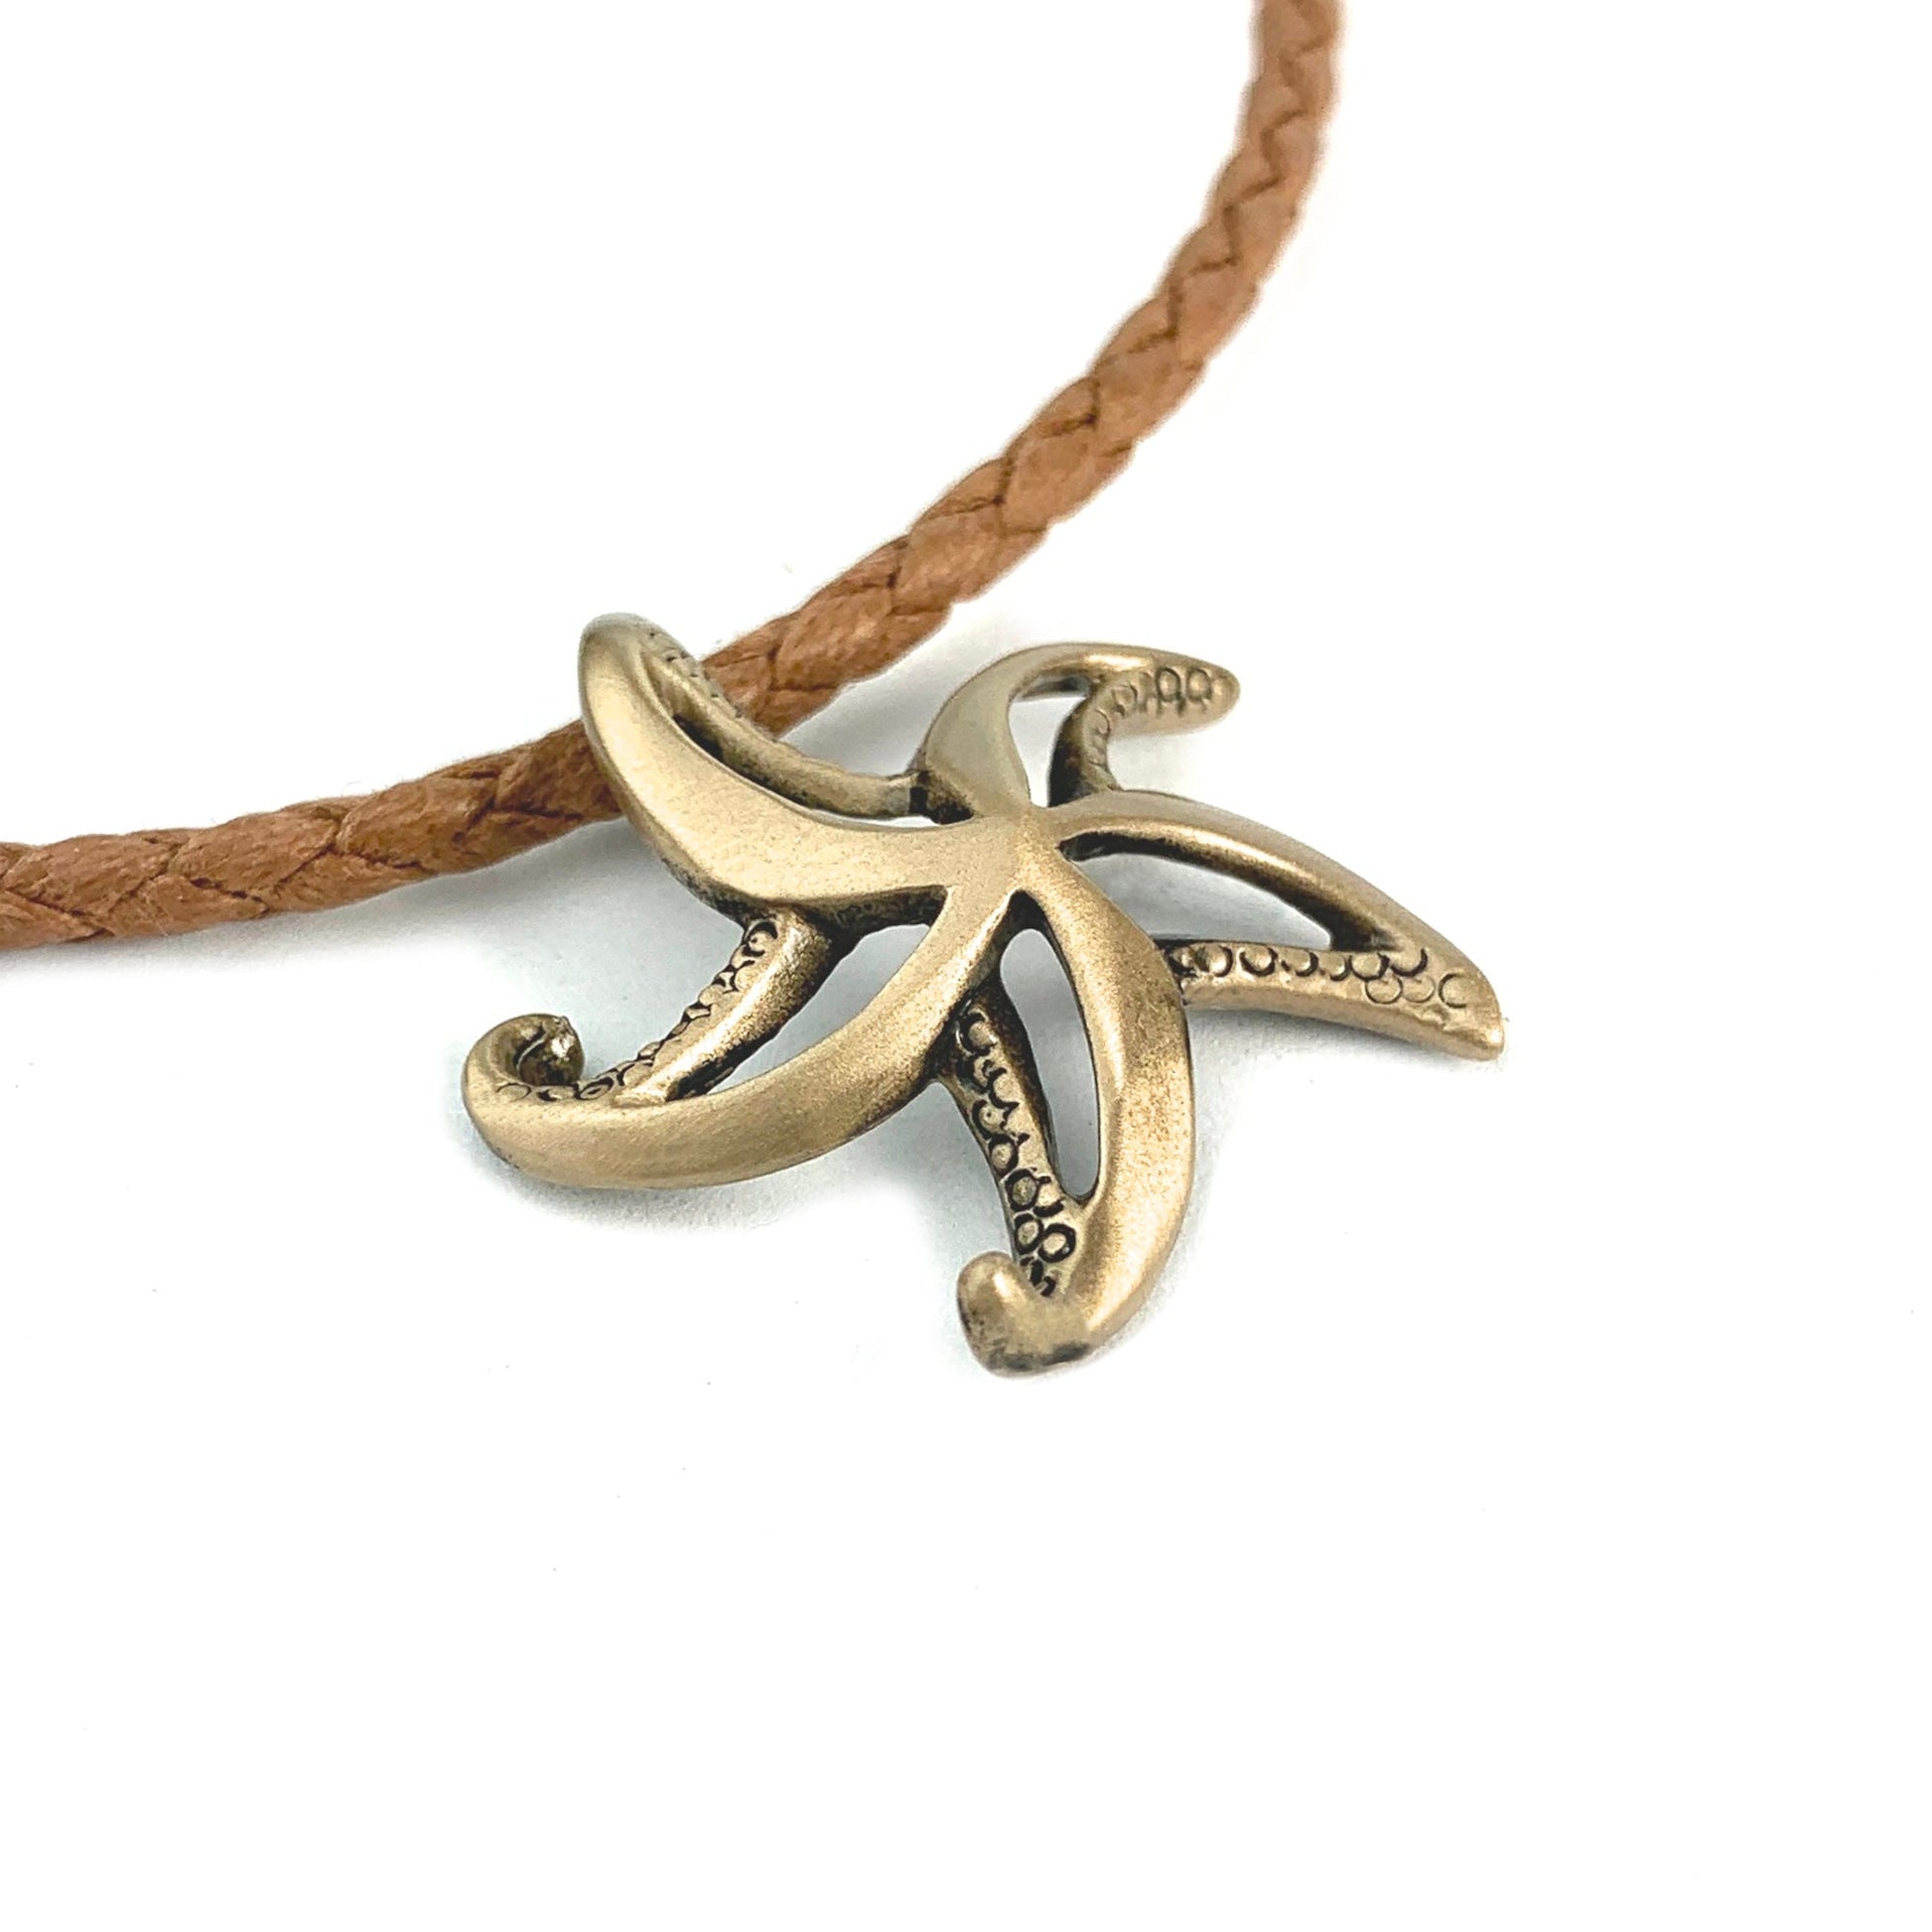 Starfish Necklace for Women Bronze- Sea Star Pendant, Starfish Necklace Charms, Beachy Necklaces, Sea Life Necklace, Starfish Gift - The Tool Store